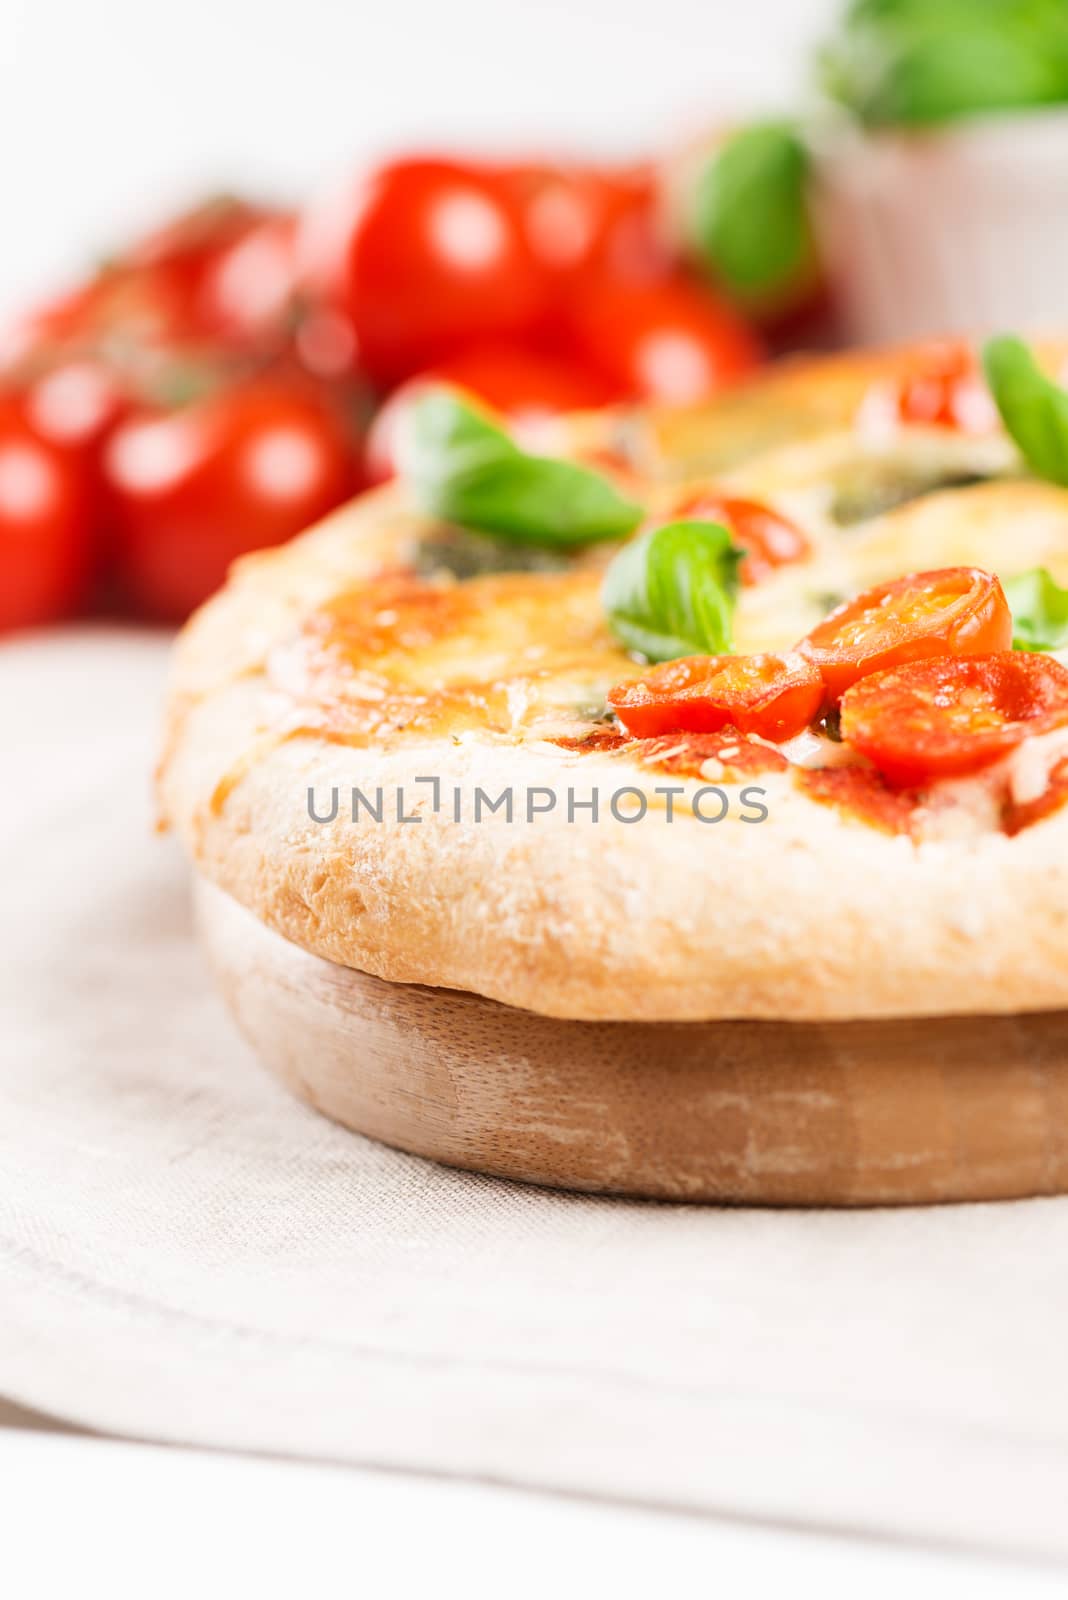 Delicious italian pizza on tablecloth with tomatoes